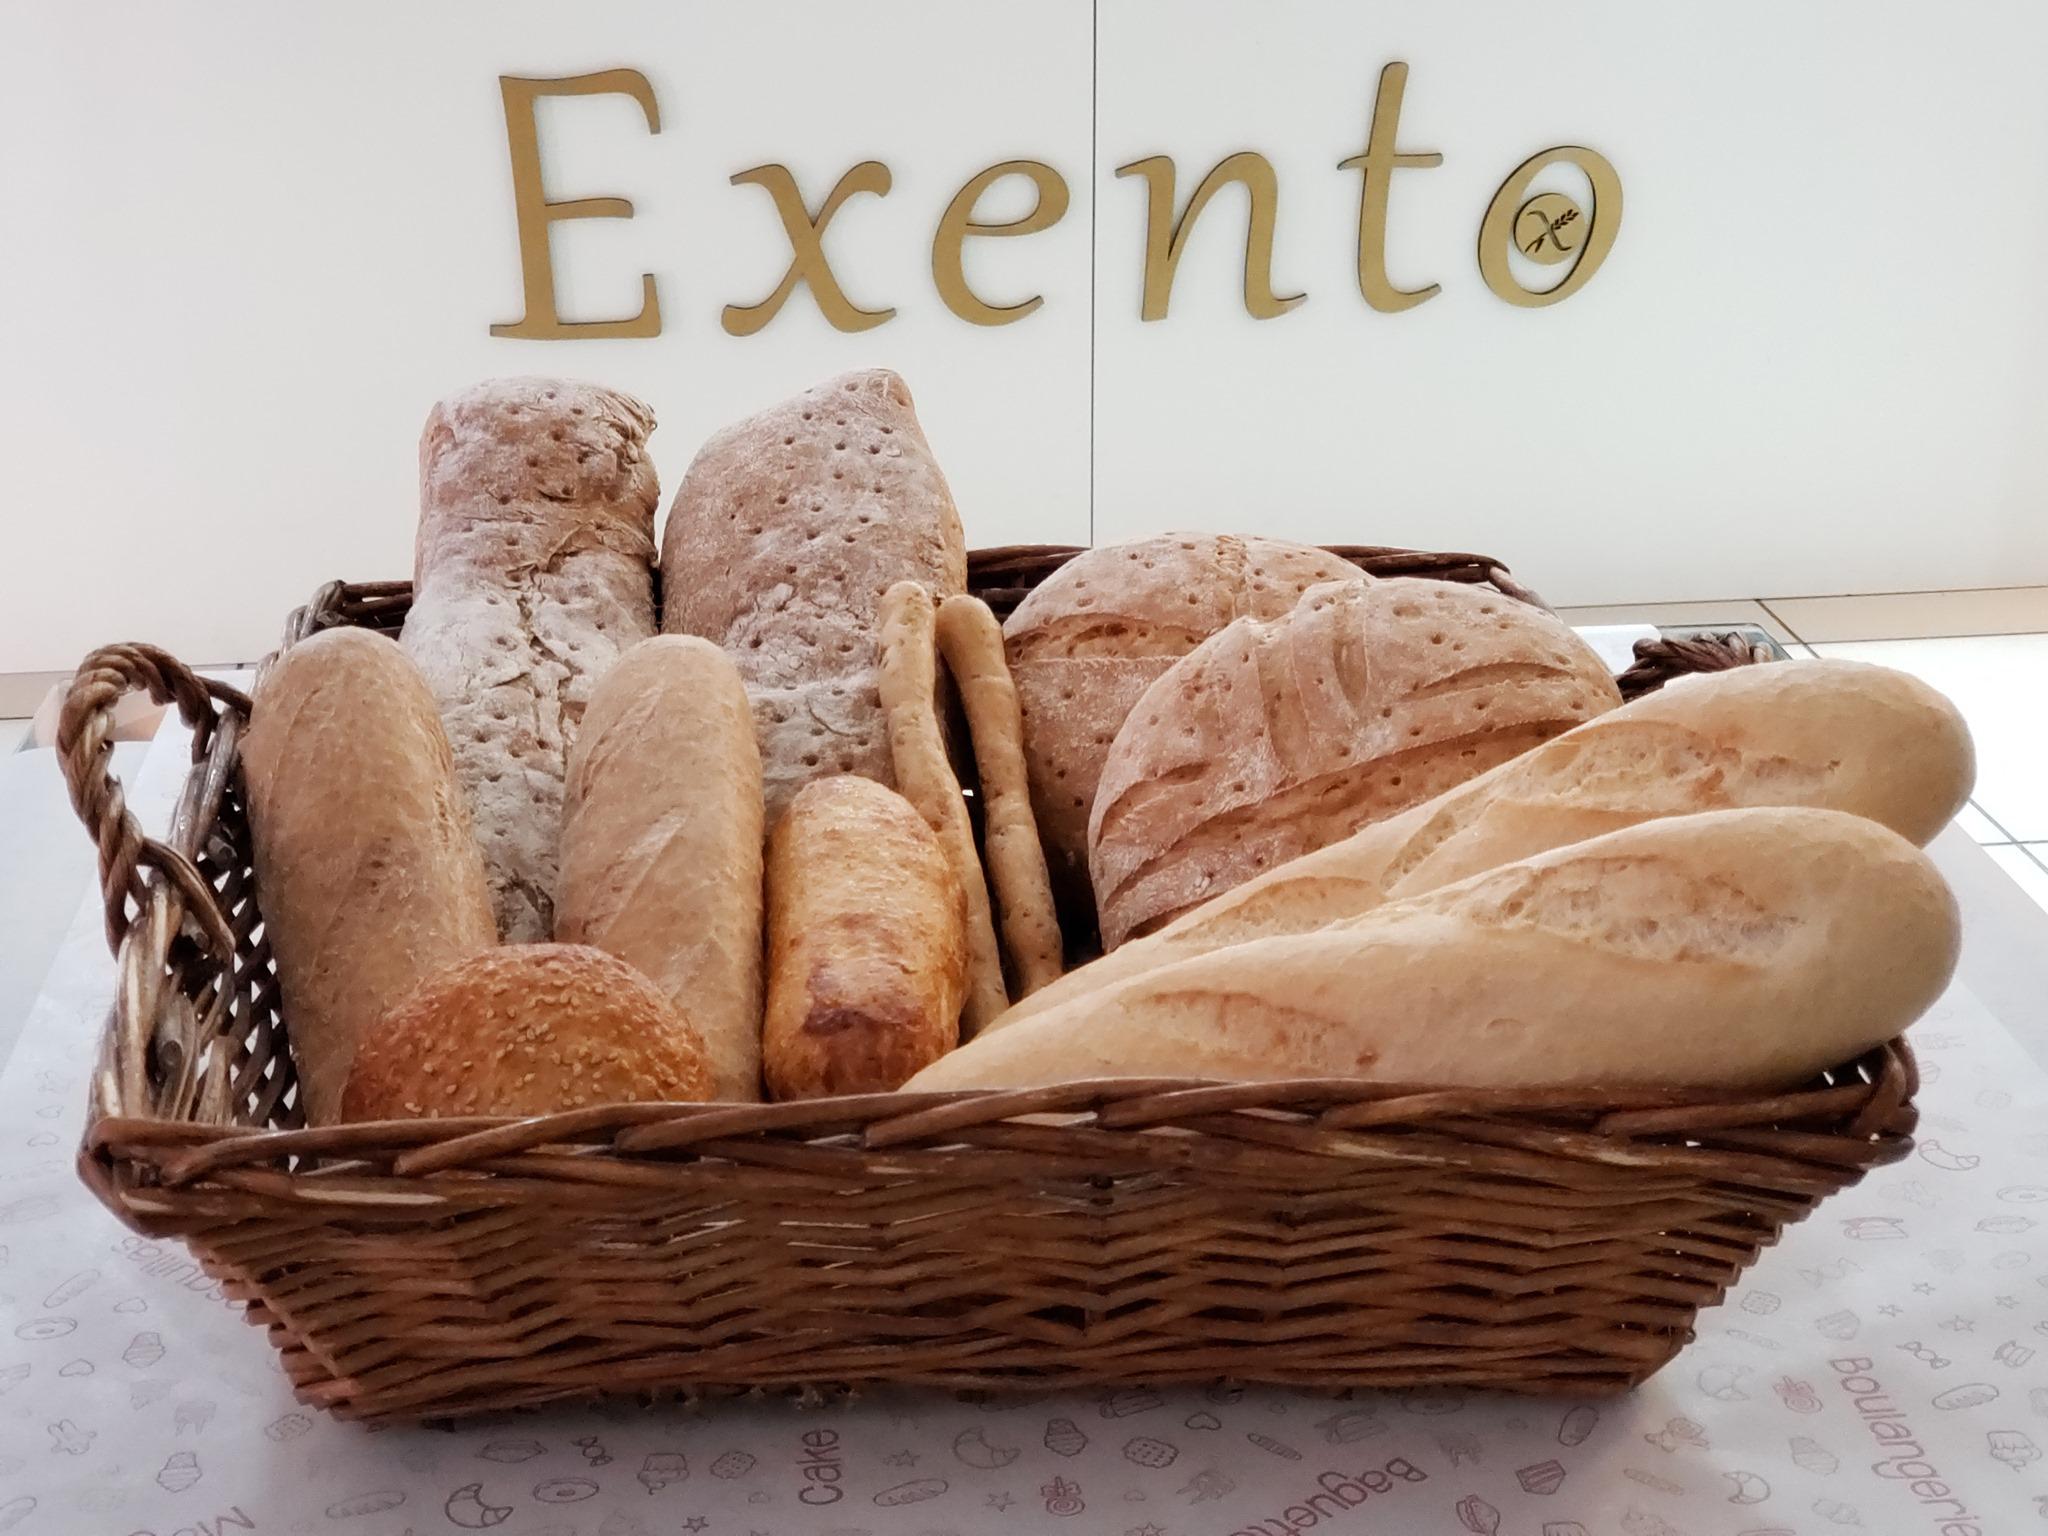 Images Exento Sin Gluten